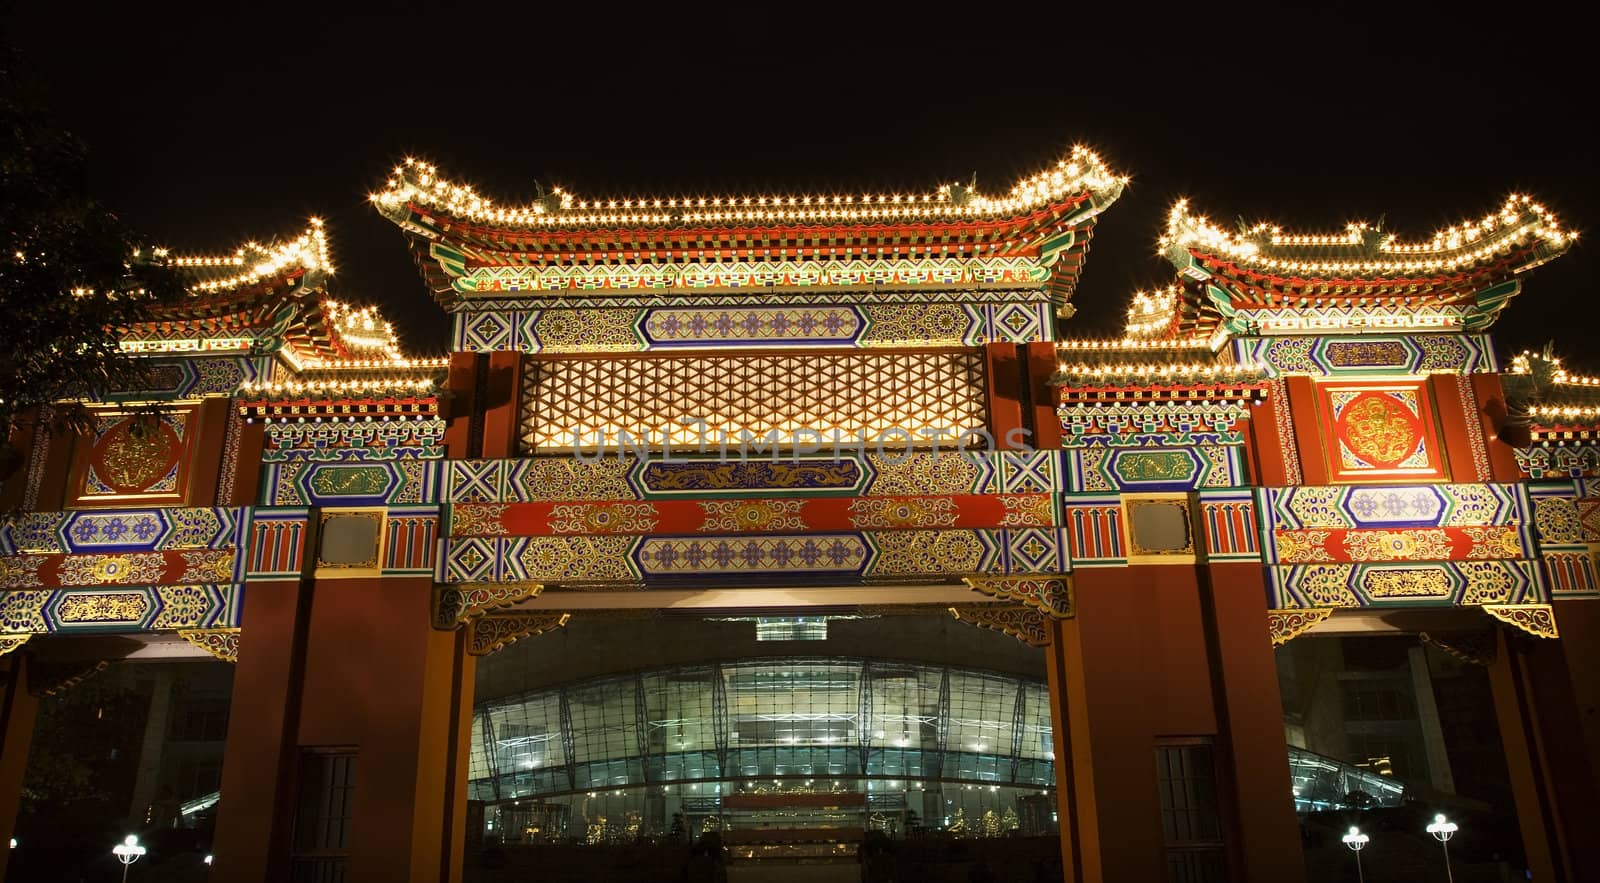 Chinese Gate Renmin Square Chongqing Sichuan China at Night by bill_perry